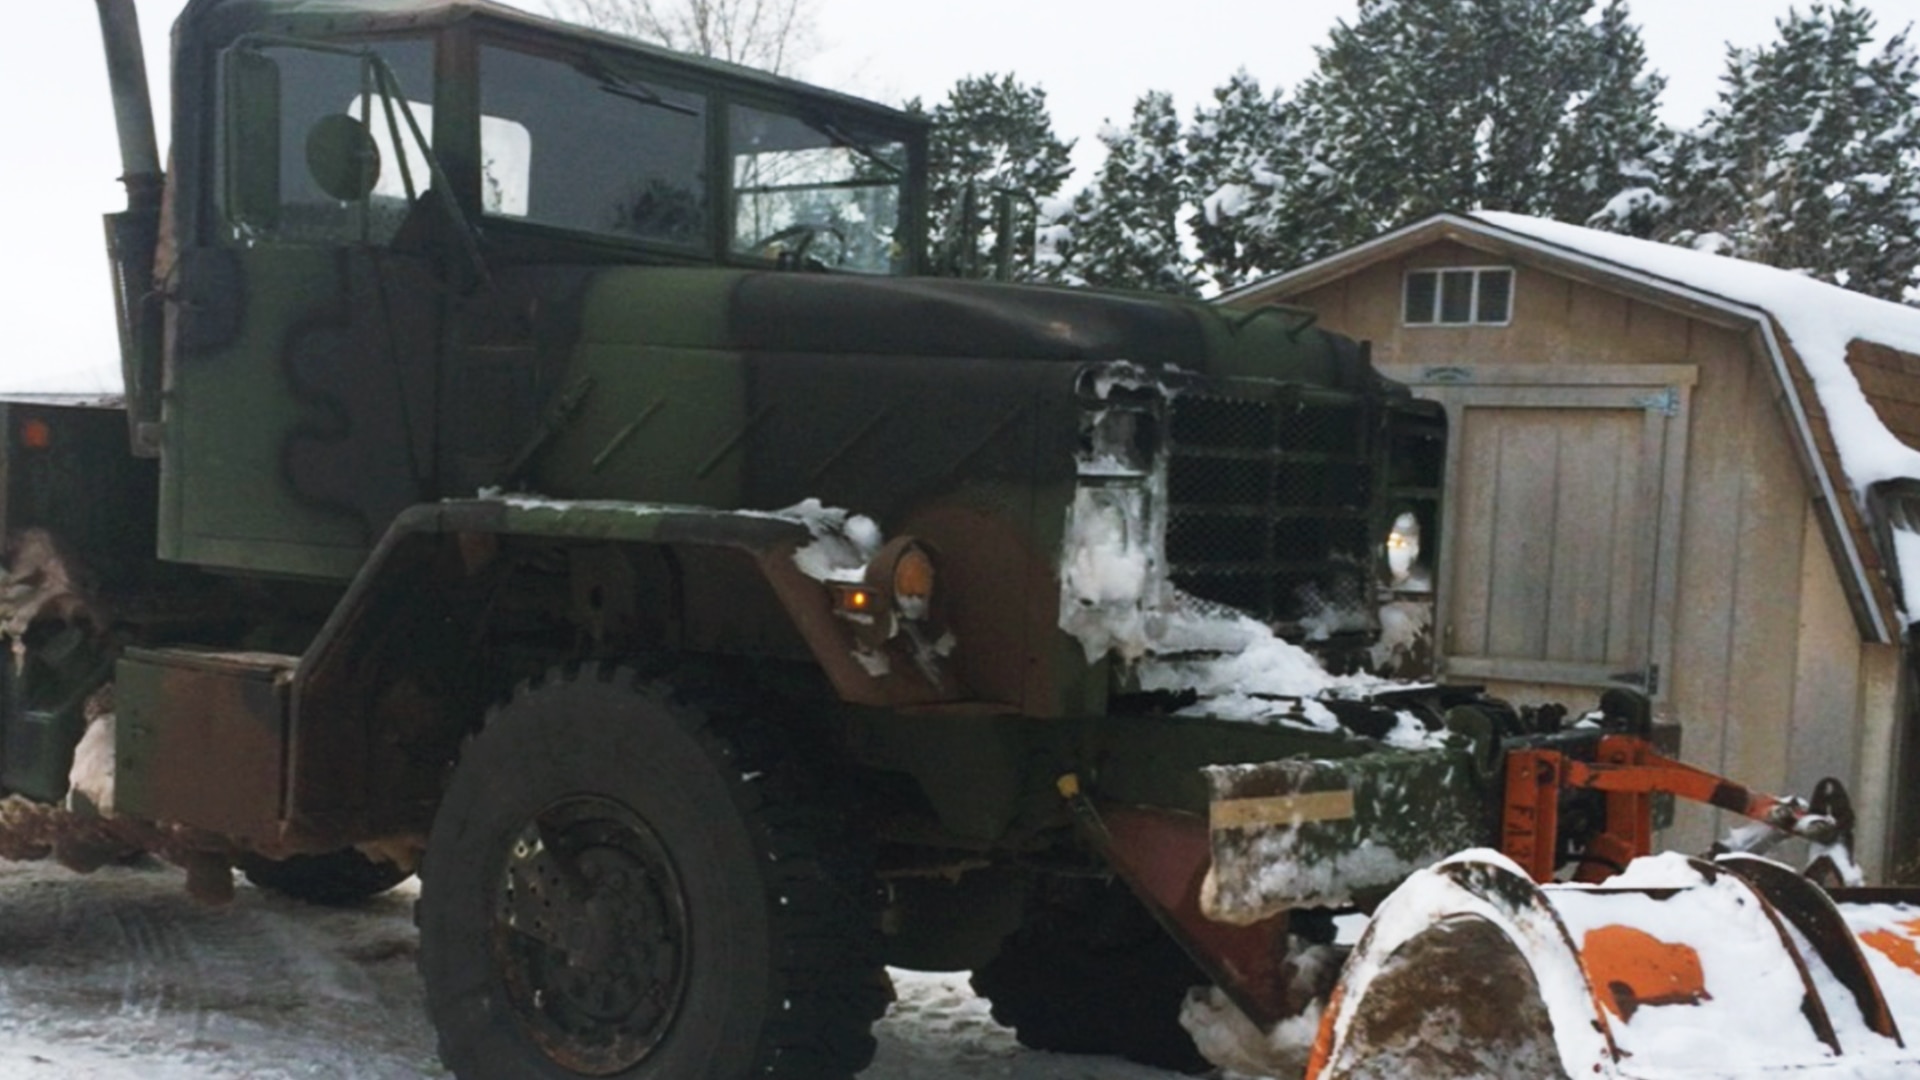 Picture of big truck with cab painted in camo sitting outdoors in the snow.